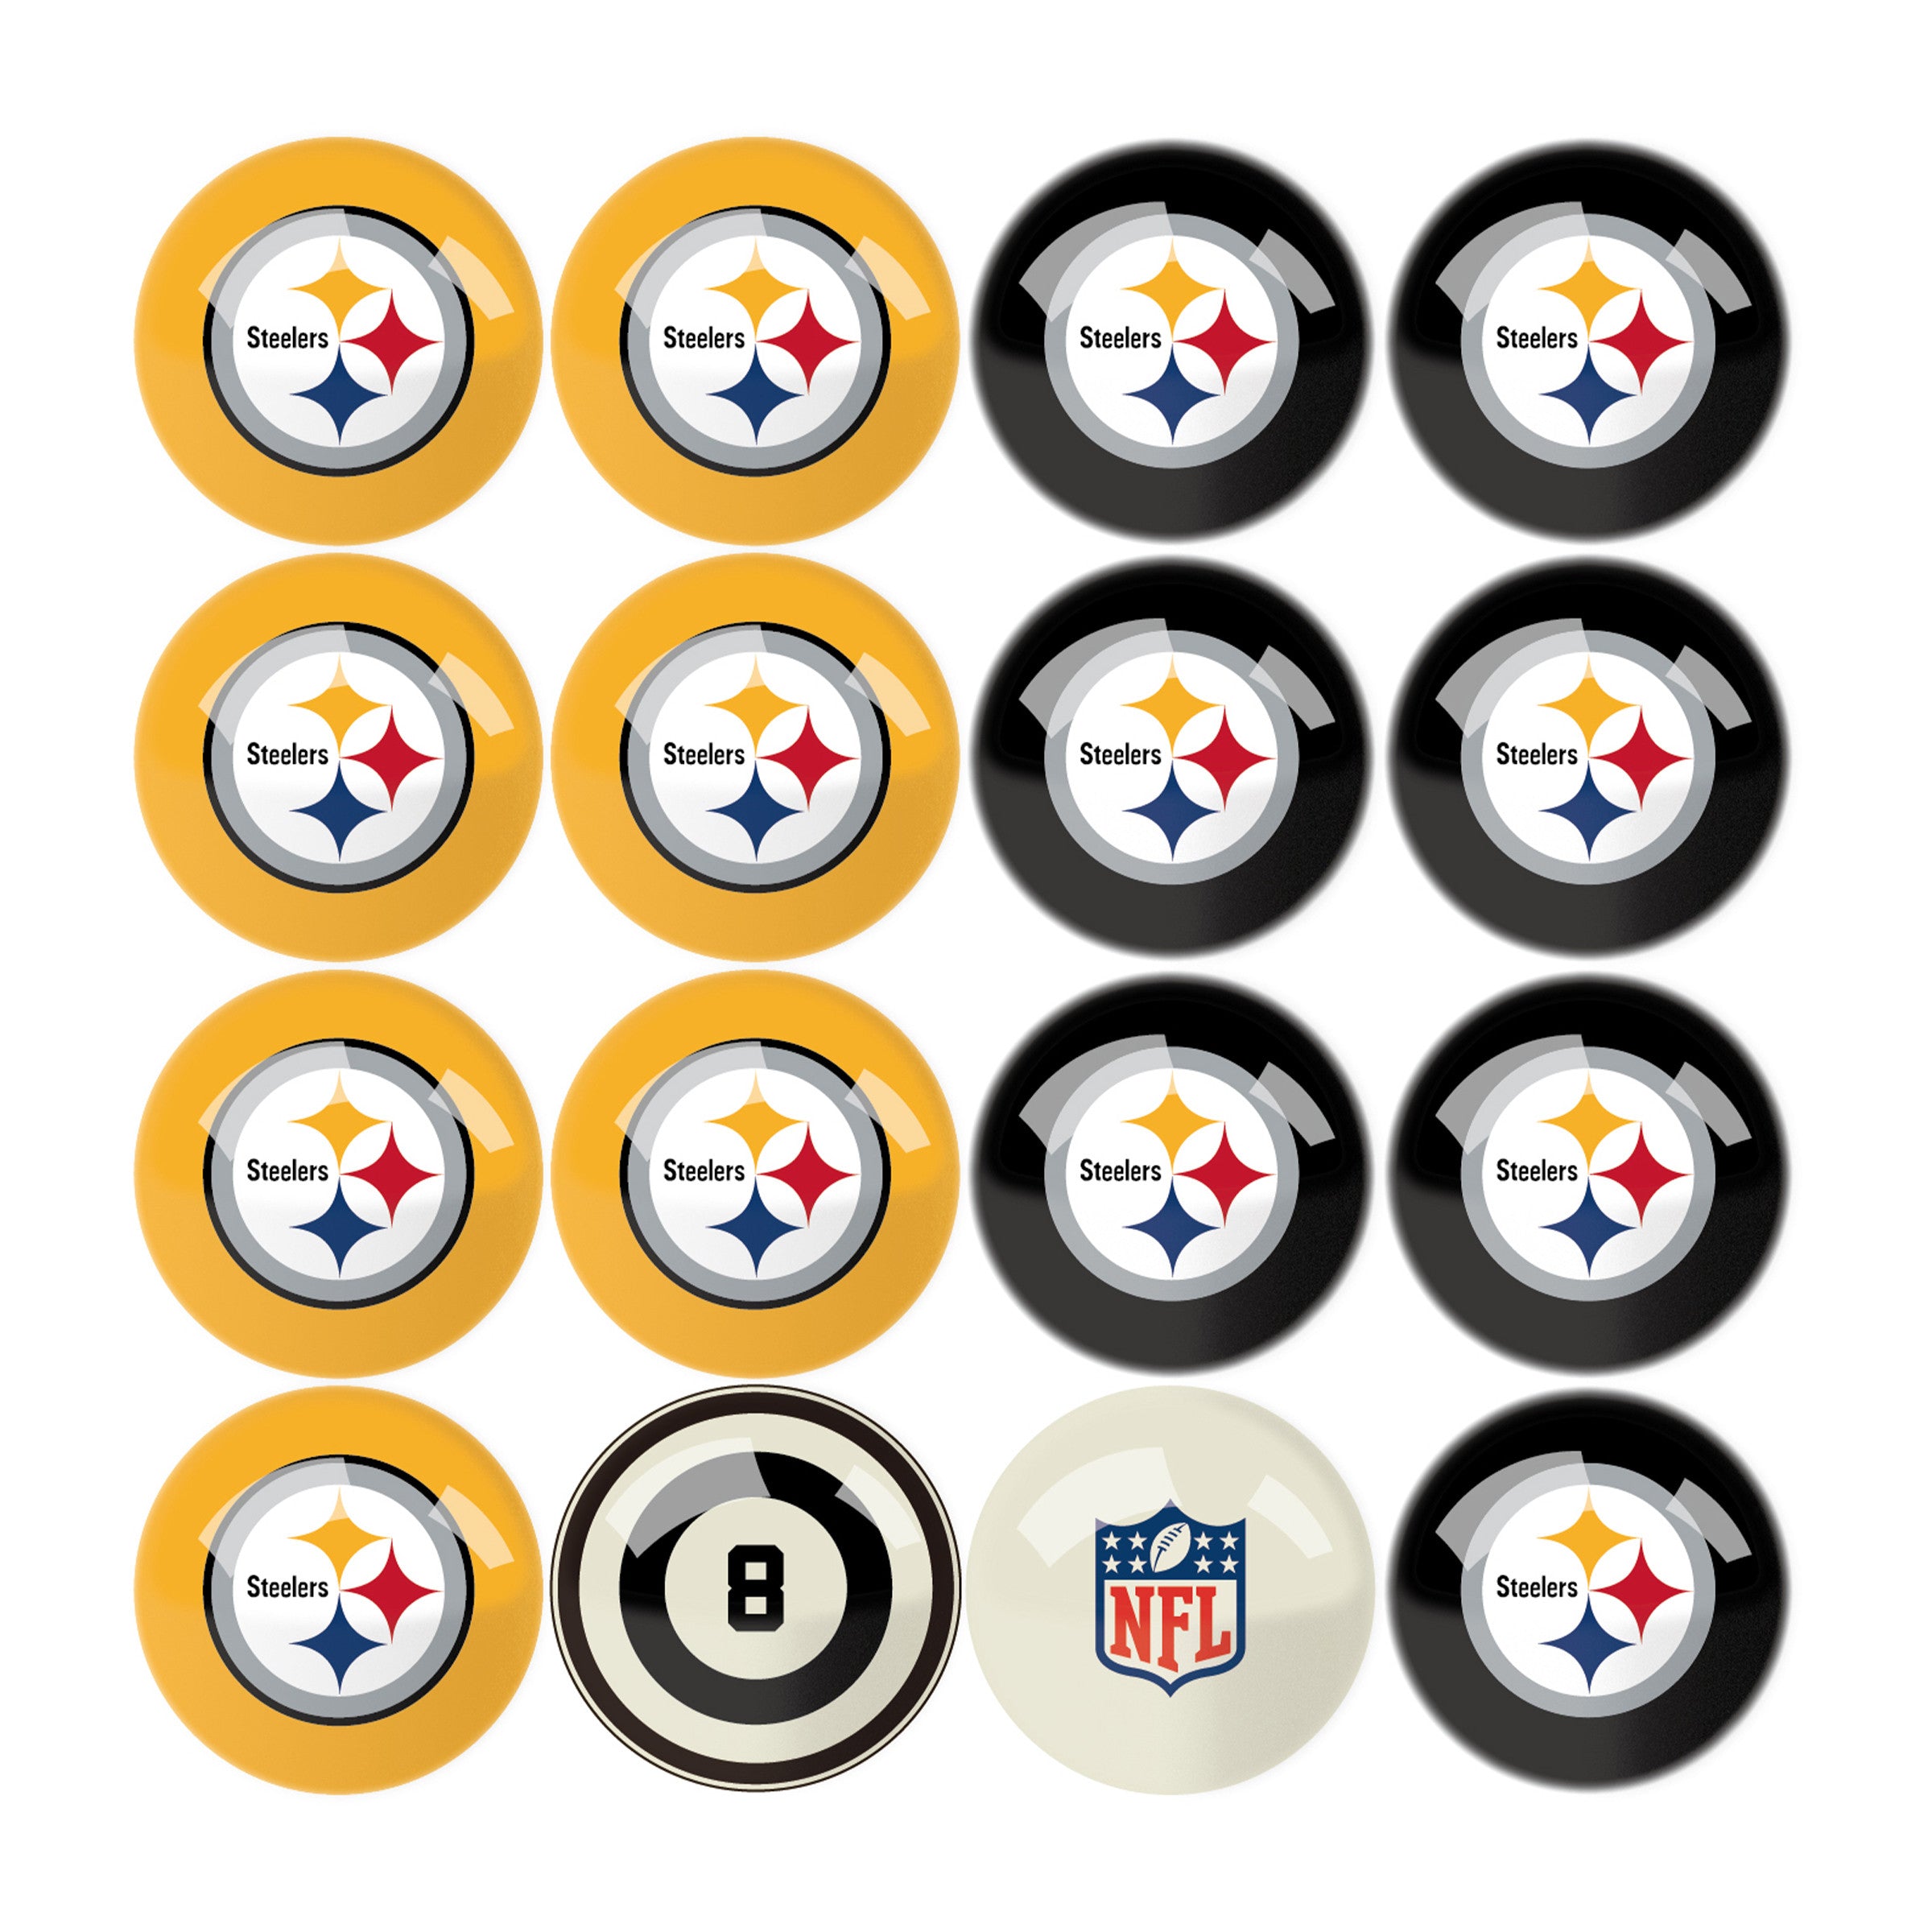 Imperial Pittsburg Steelers Billiard Balls With Numbers